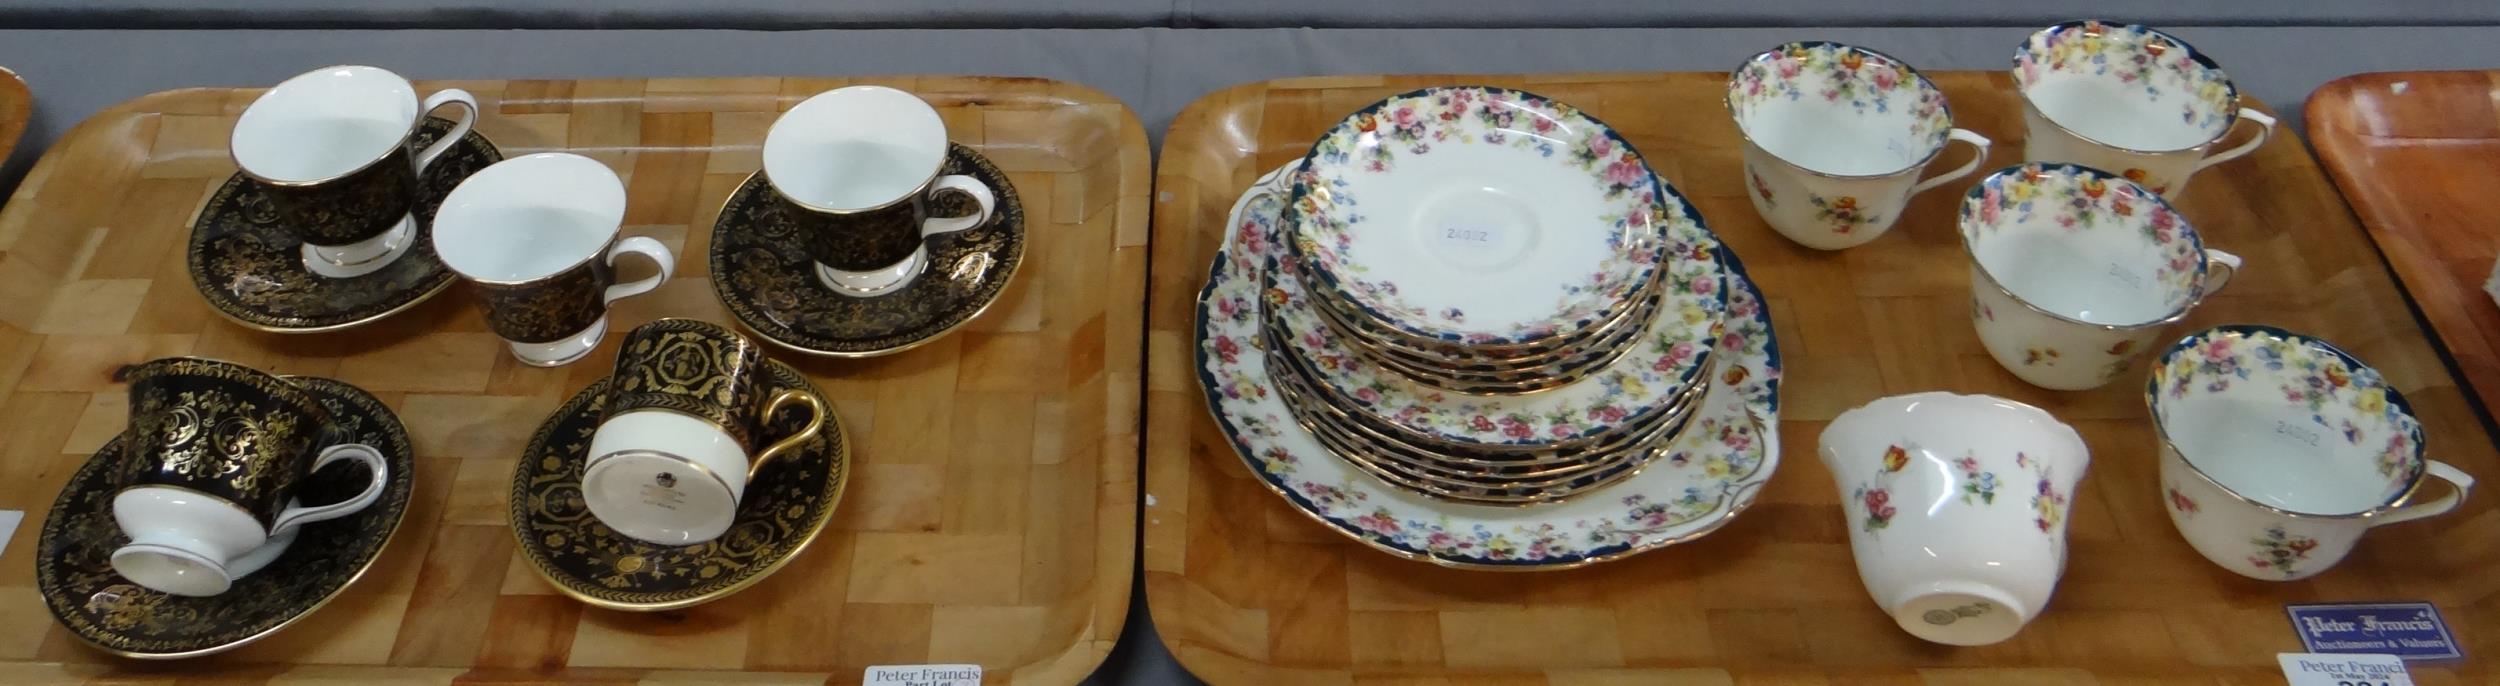 Royal Doulton 1920's floral part teaset; teacups and saucers, plates etc. Together with a tray of